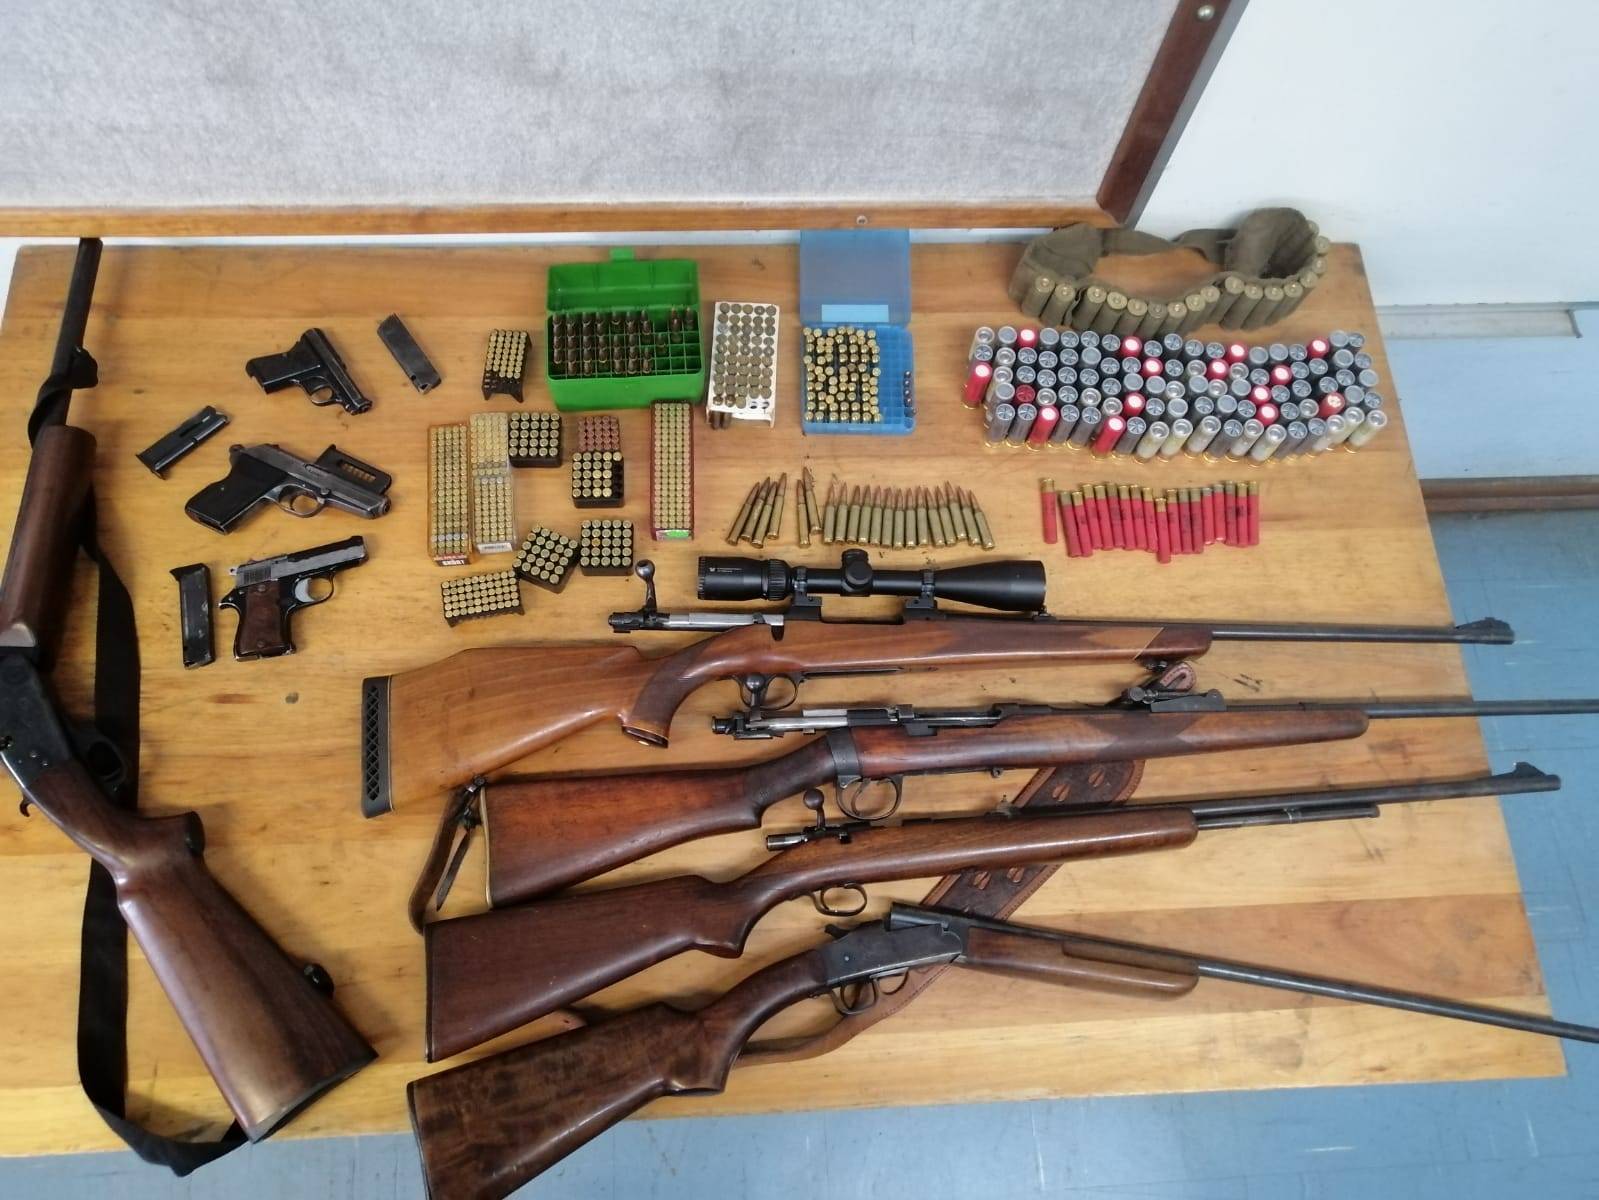 Nine firearms recovered during police operation